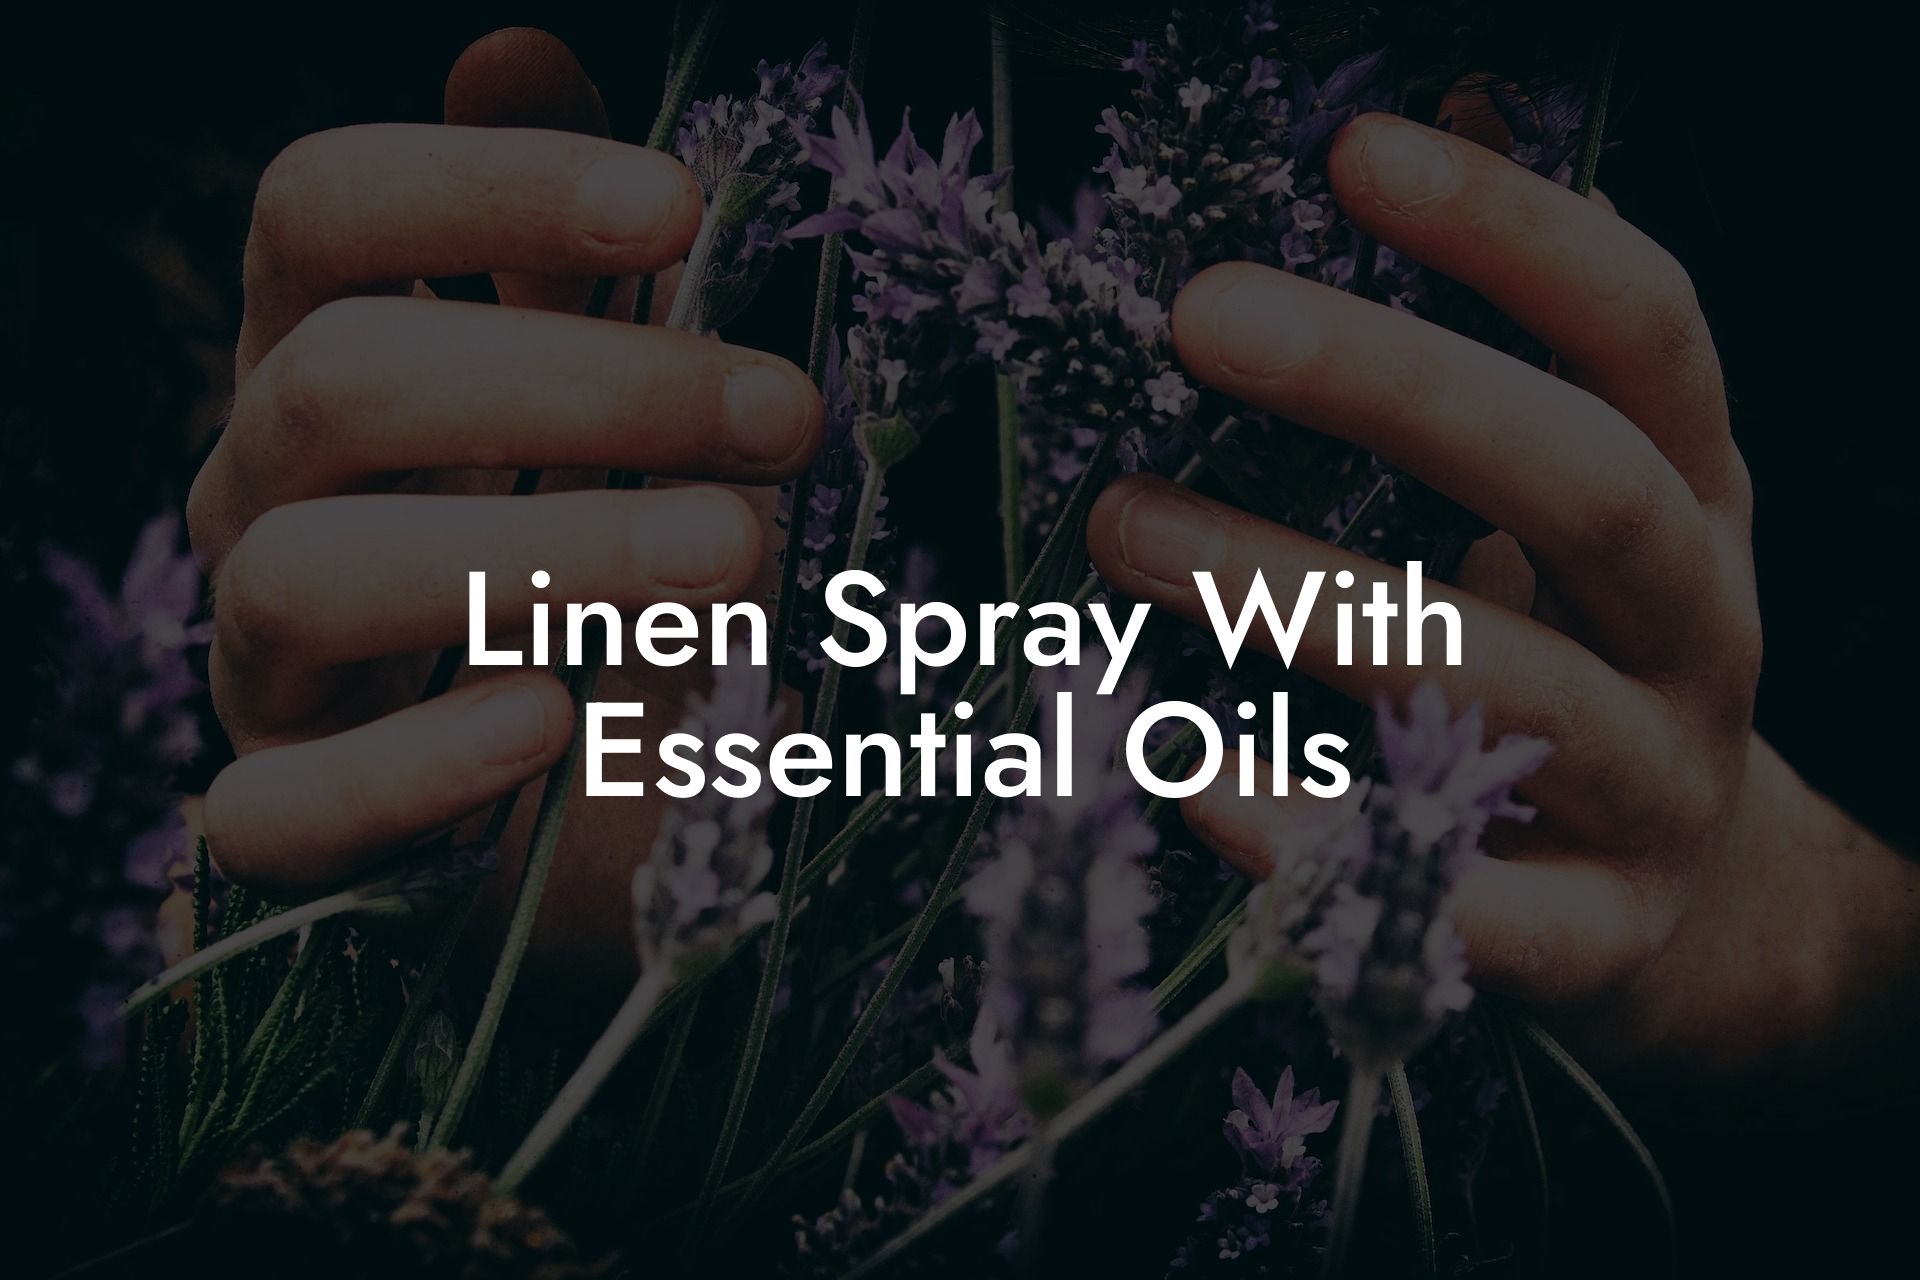 Linen Spray With Essential Oils